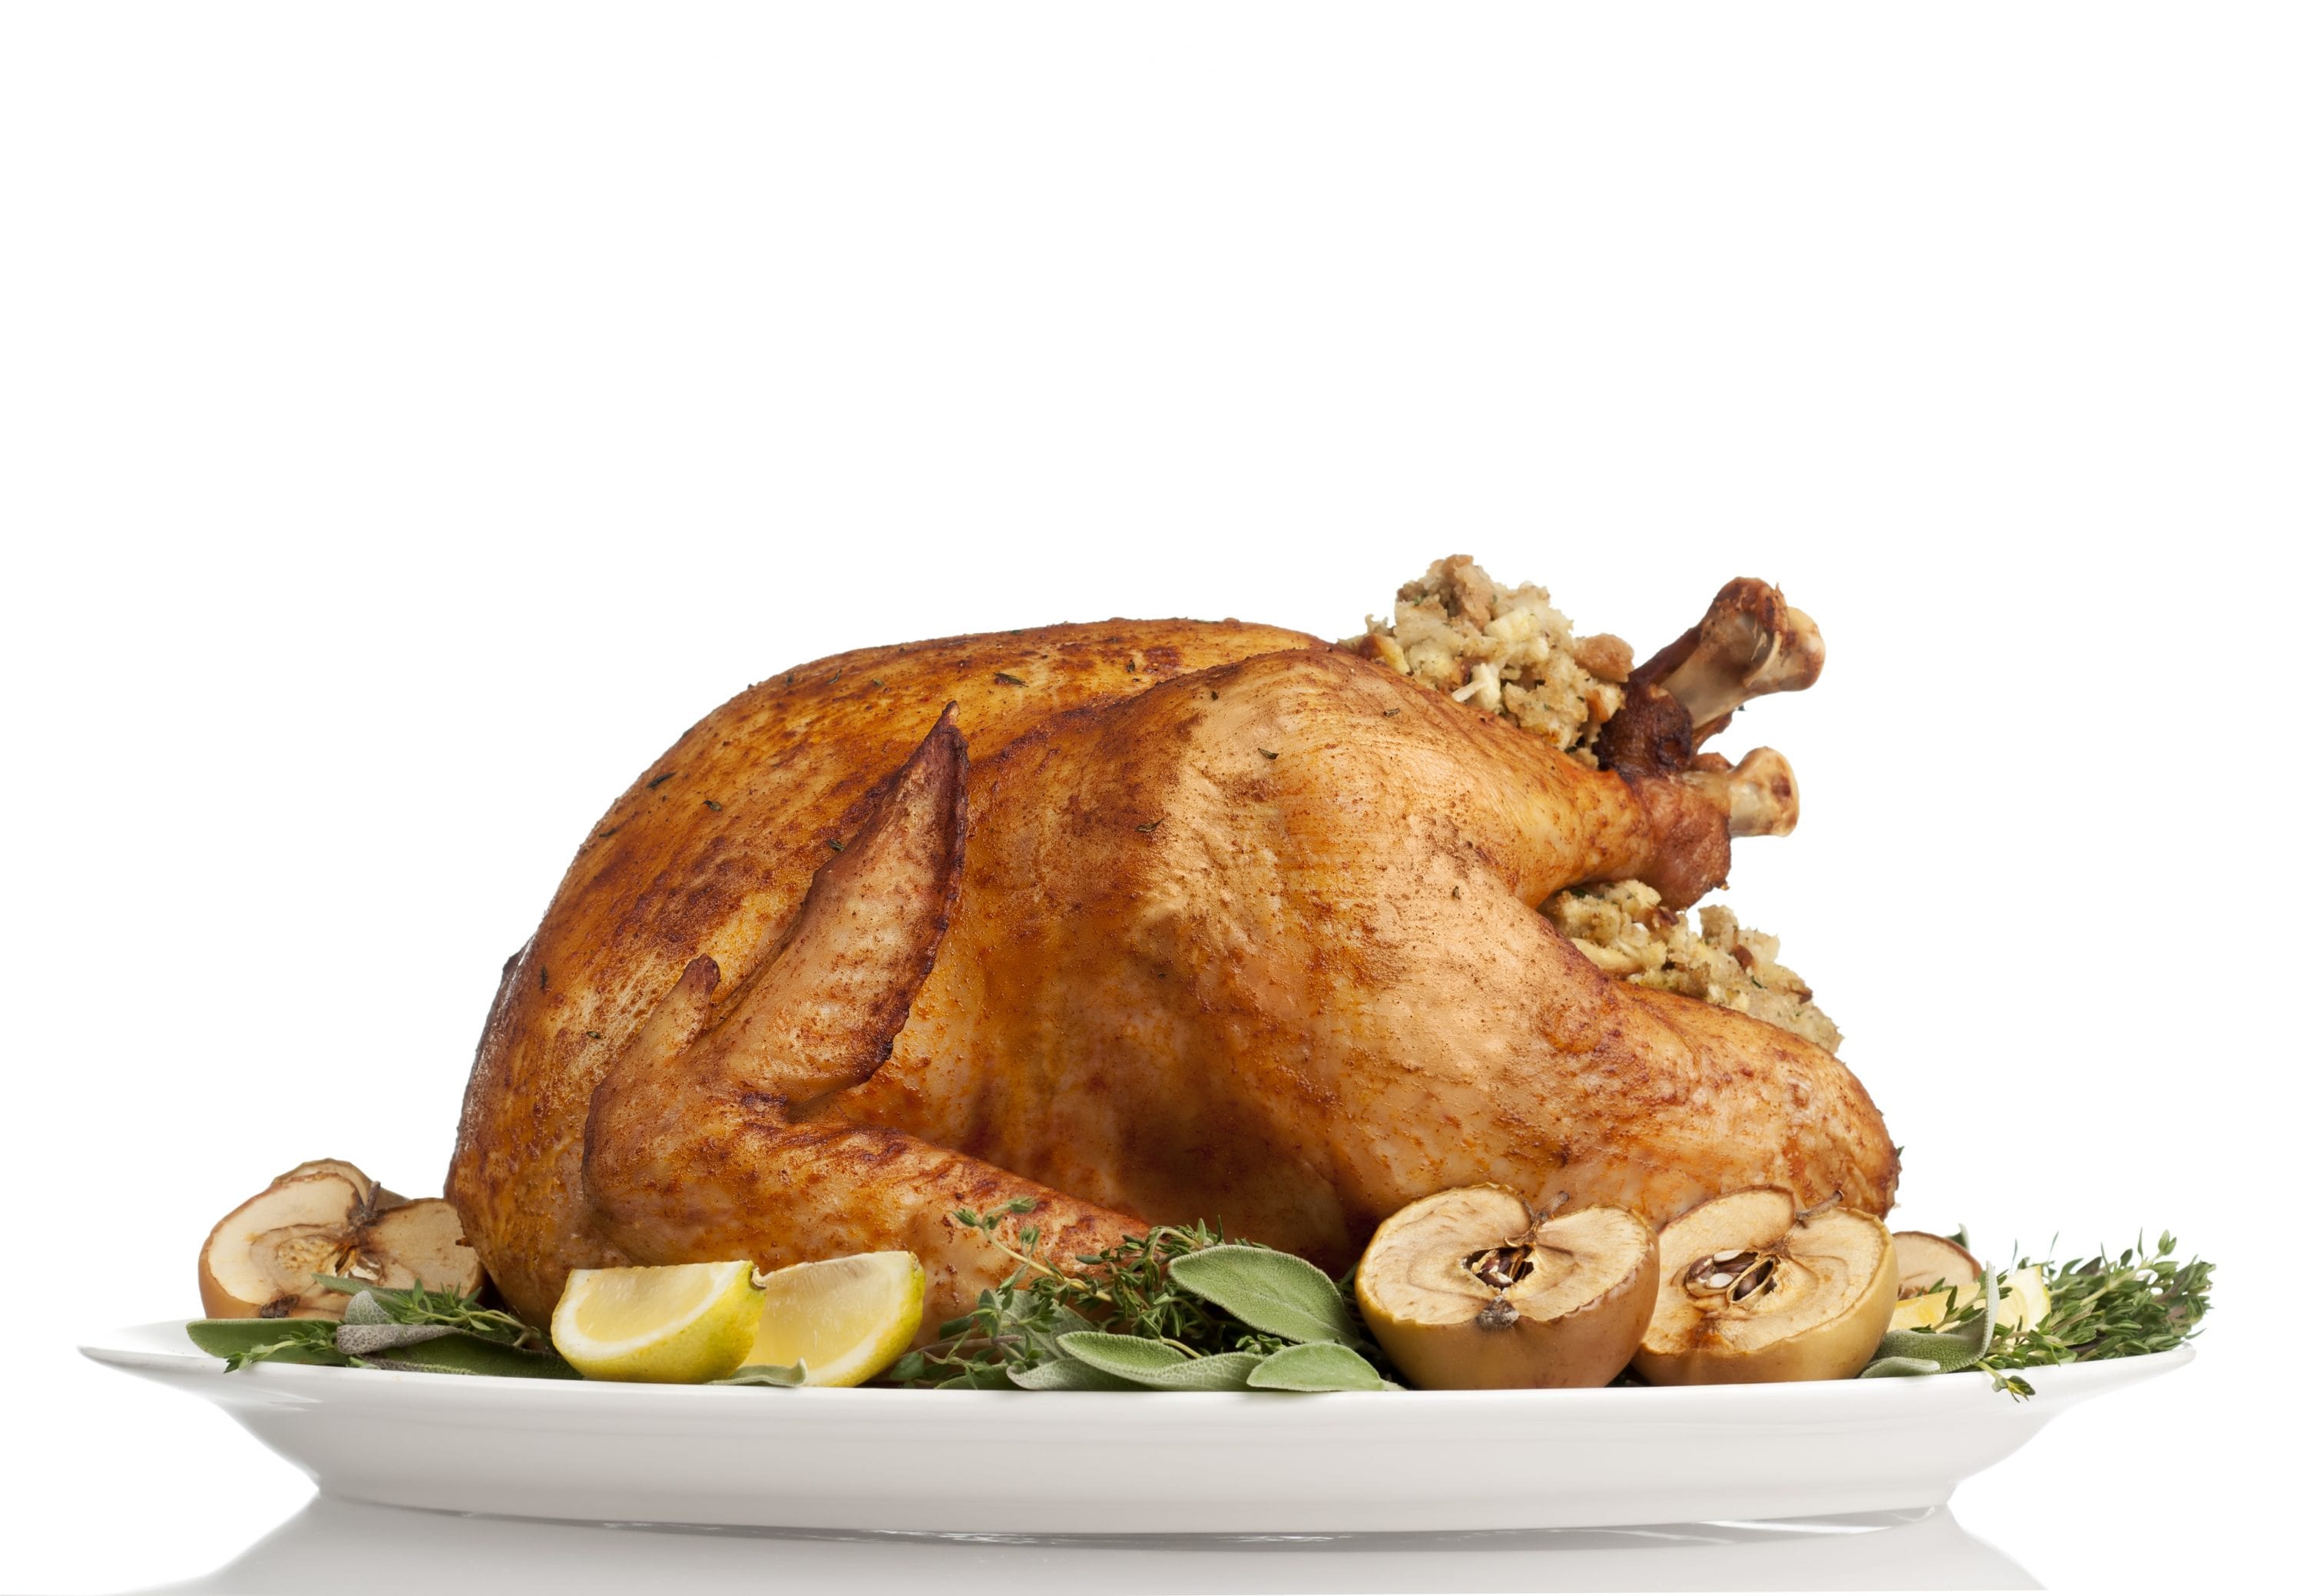 Kick-start a healthy new year by gobbling up more turkey